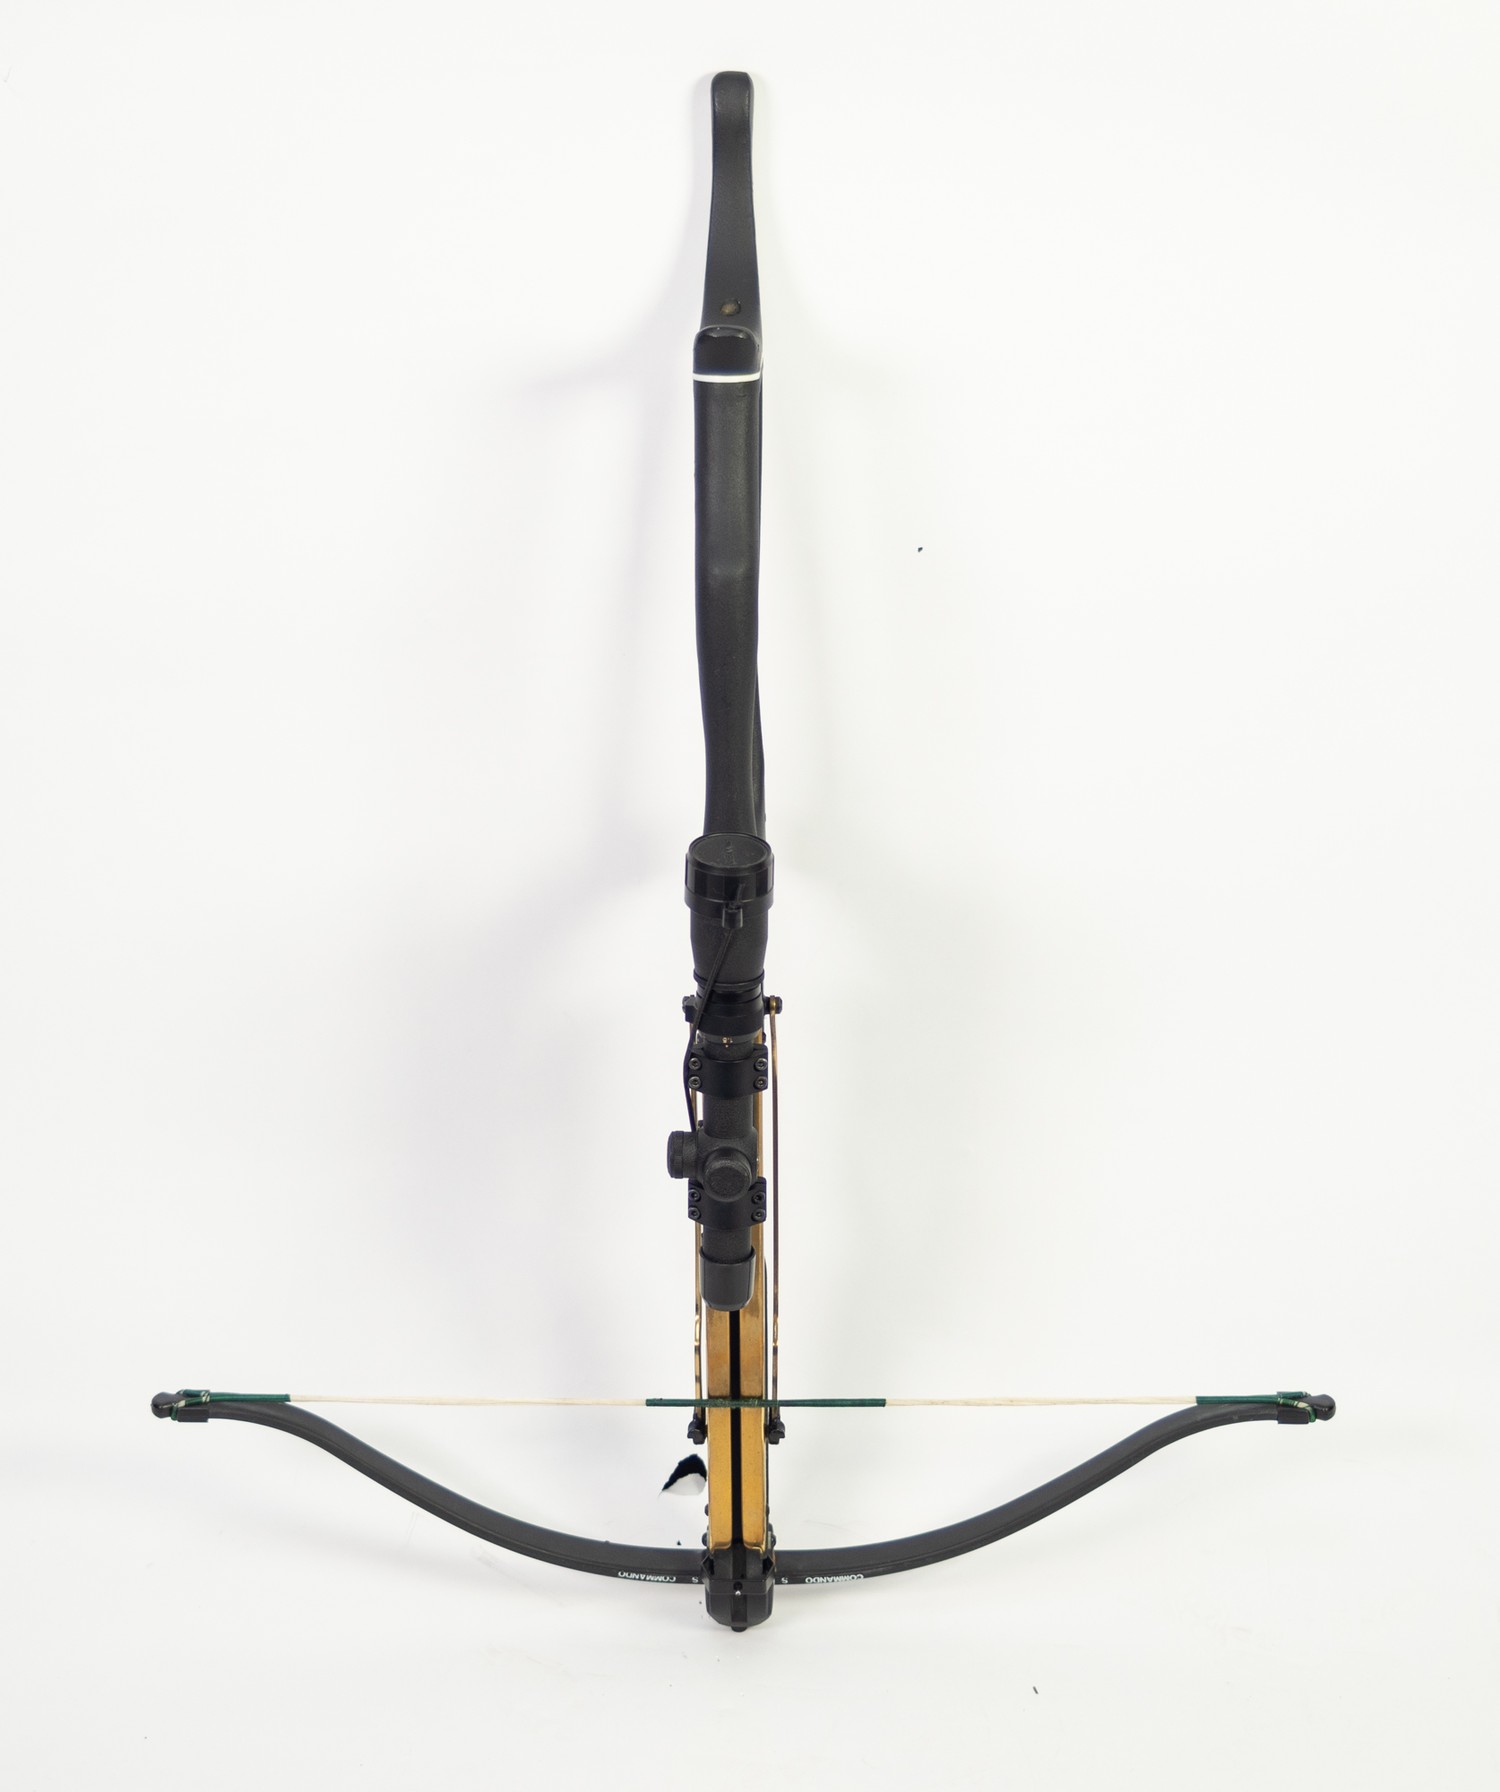 BARNETT ?COMMANDO? CROSSBOW IN BLACK AND BRASS, fitted with a SIMMONS WHITETAIL 5X20 SIGHT, in a